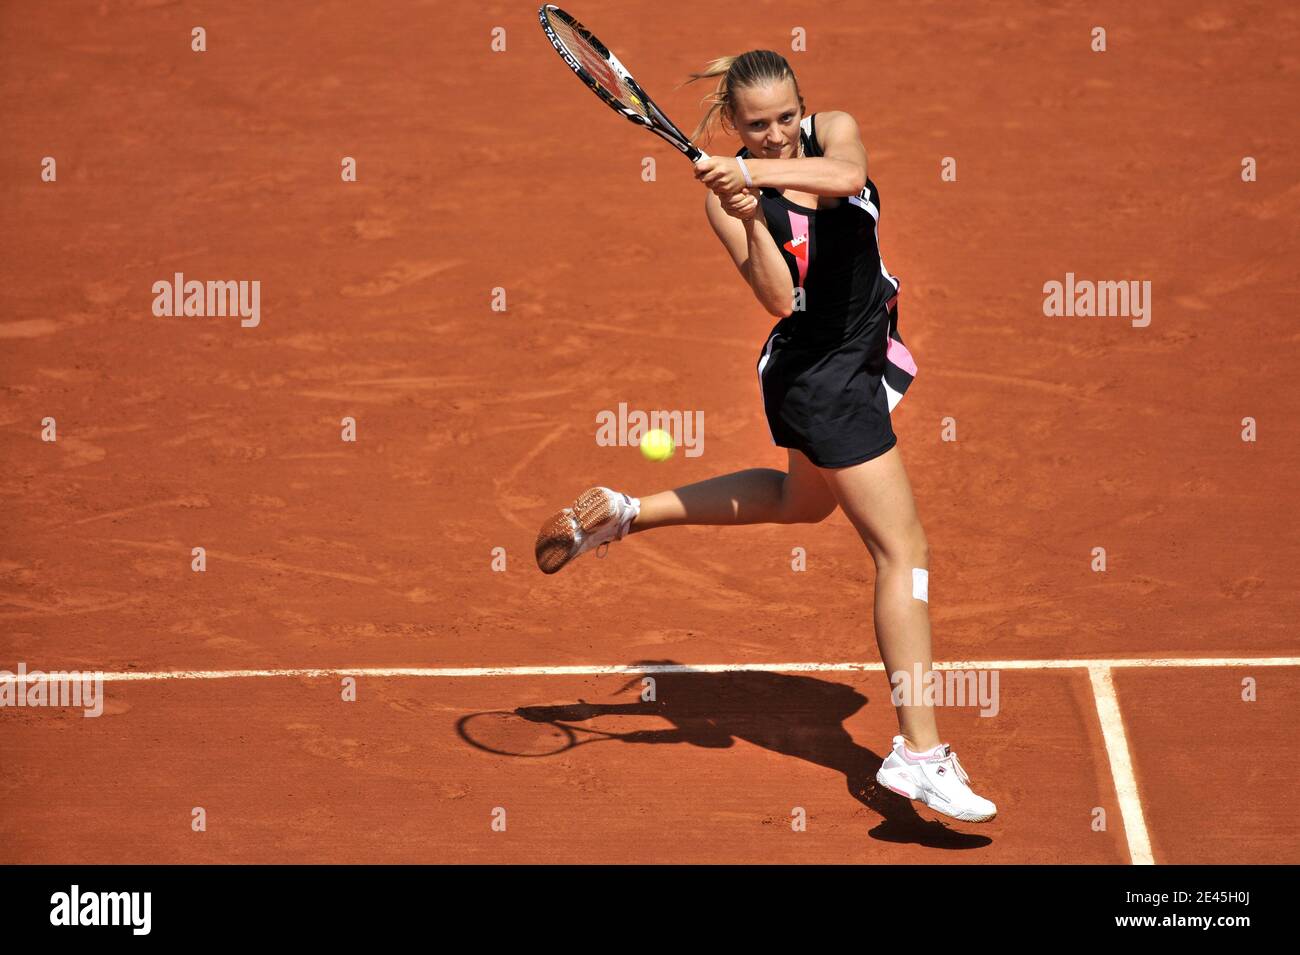 Hungaria's Agnes Szavay defeats, 6-0, 6-4, USA's Venus Williams in their third round of the French Open tennis at the Roland Garros stadium in Paris, France on May 29, 2009. Photo by Christophe Guibbaud/Cameleon/ABACAPRESS.COM Stock Photo